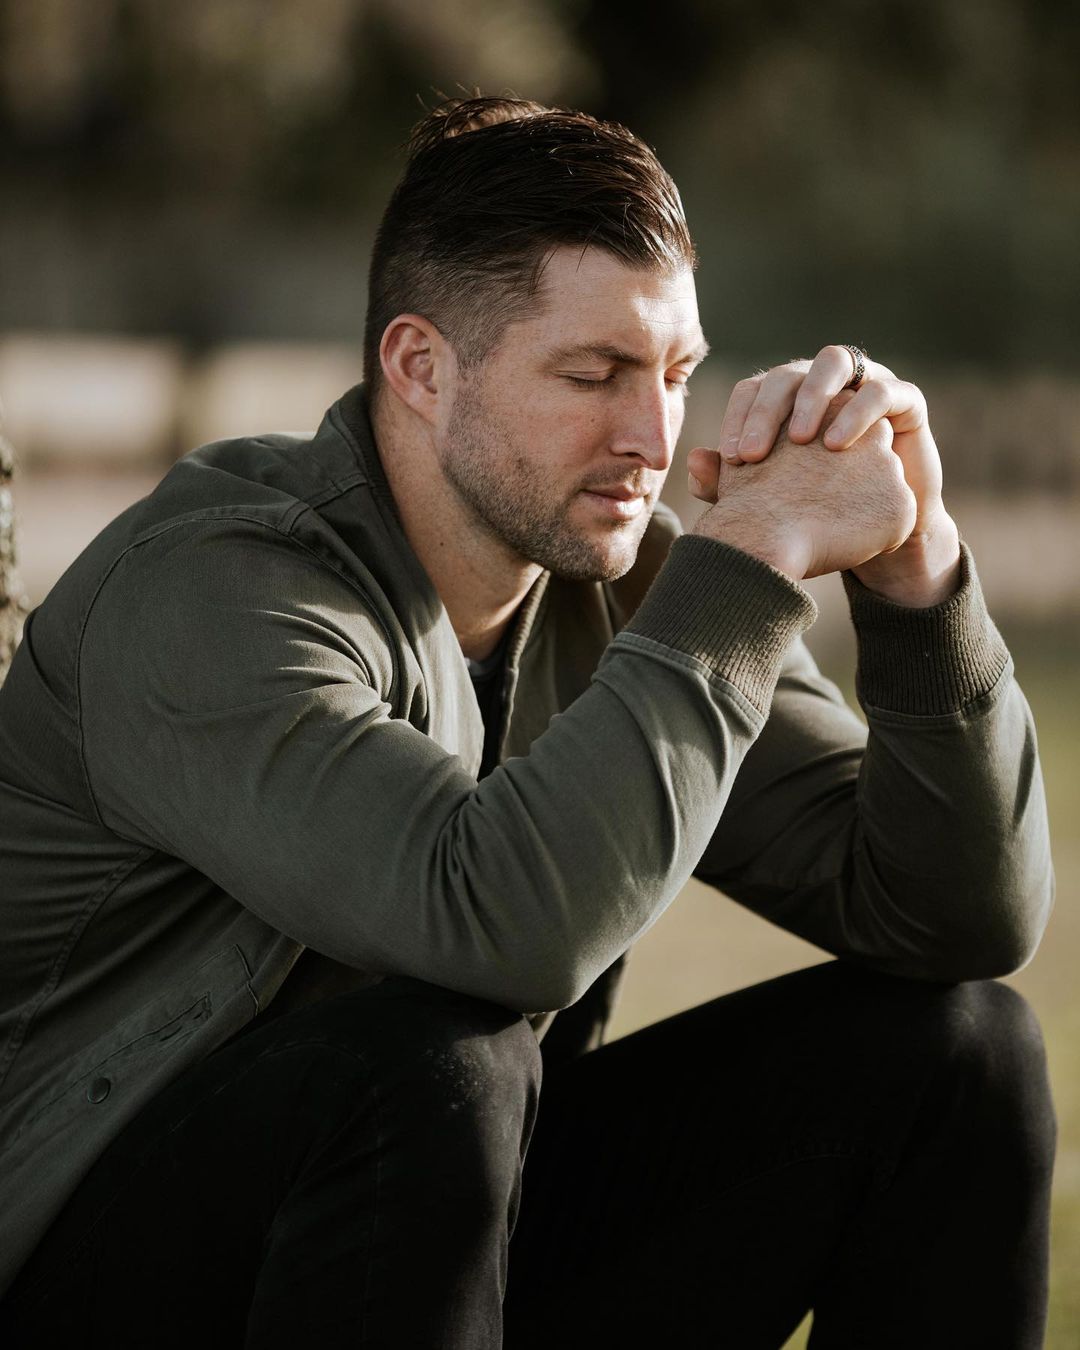 As of 2021, Tim Tebow net worth is estimated to be $10 million.